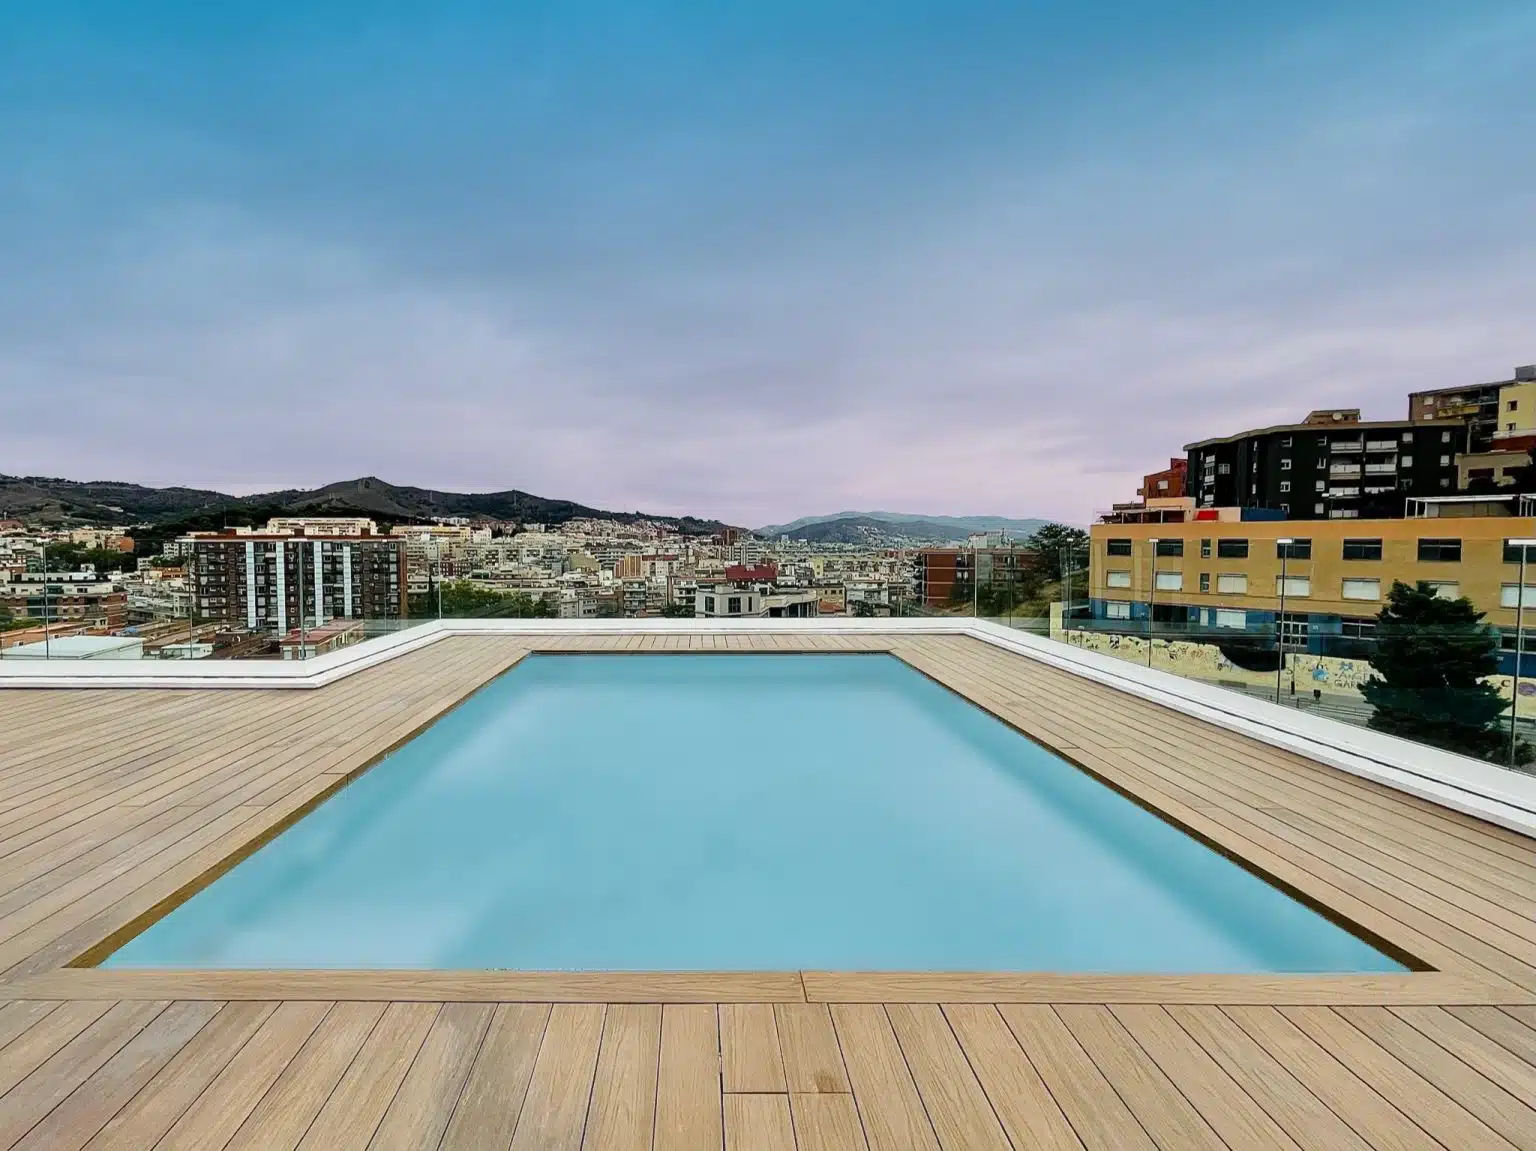 Swimming pool of the PS building in Horta, Barcelona